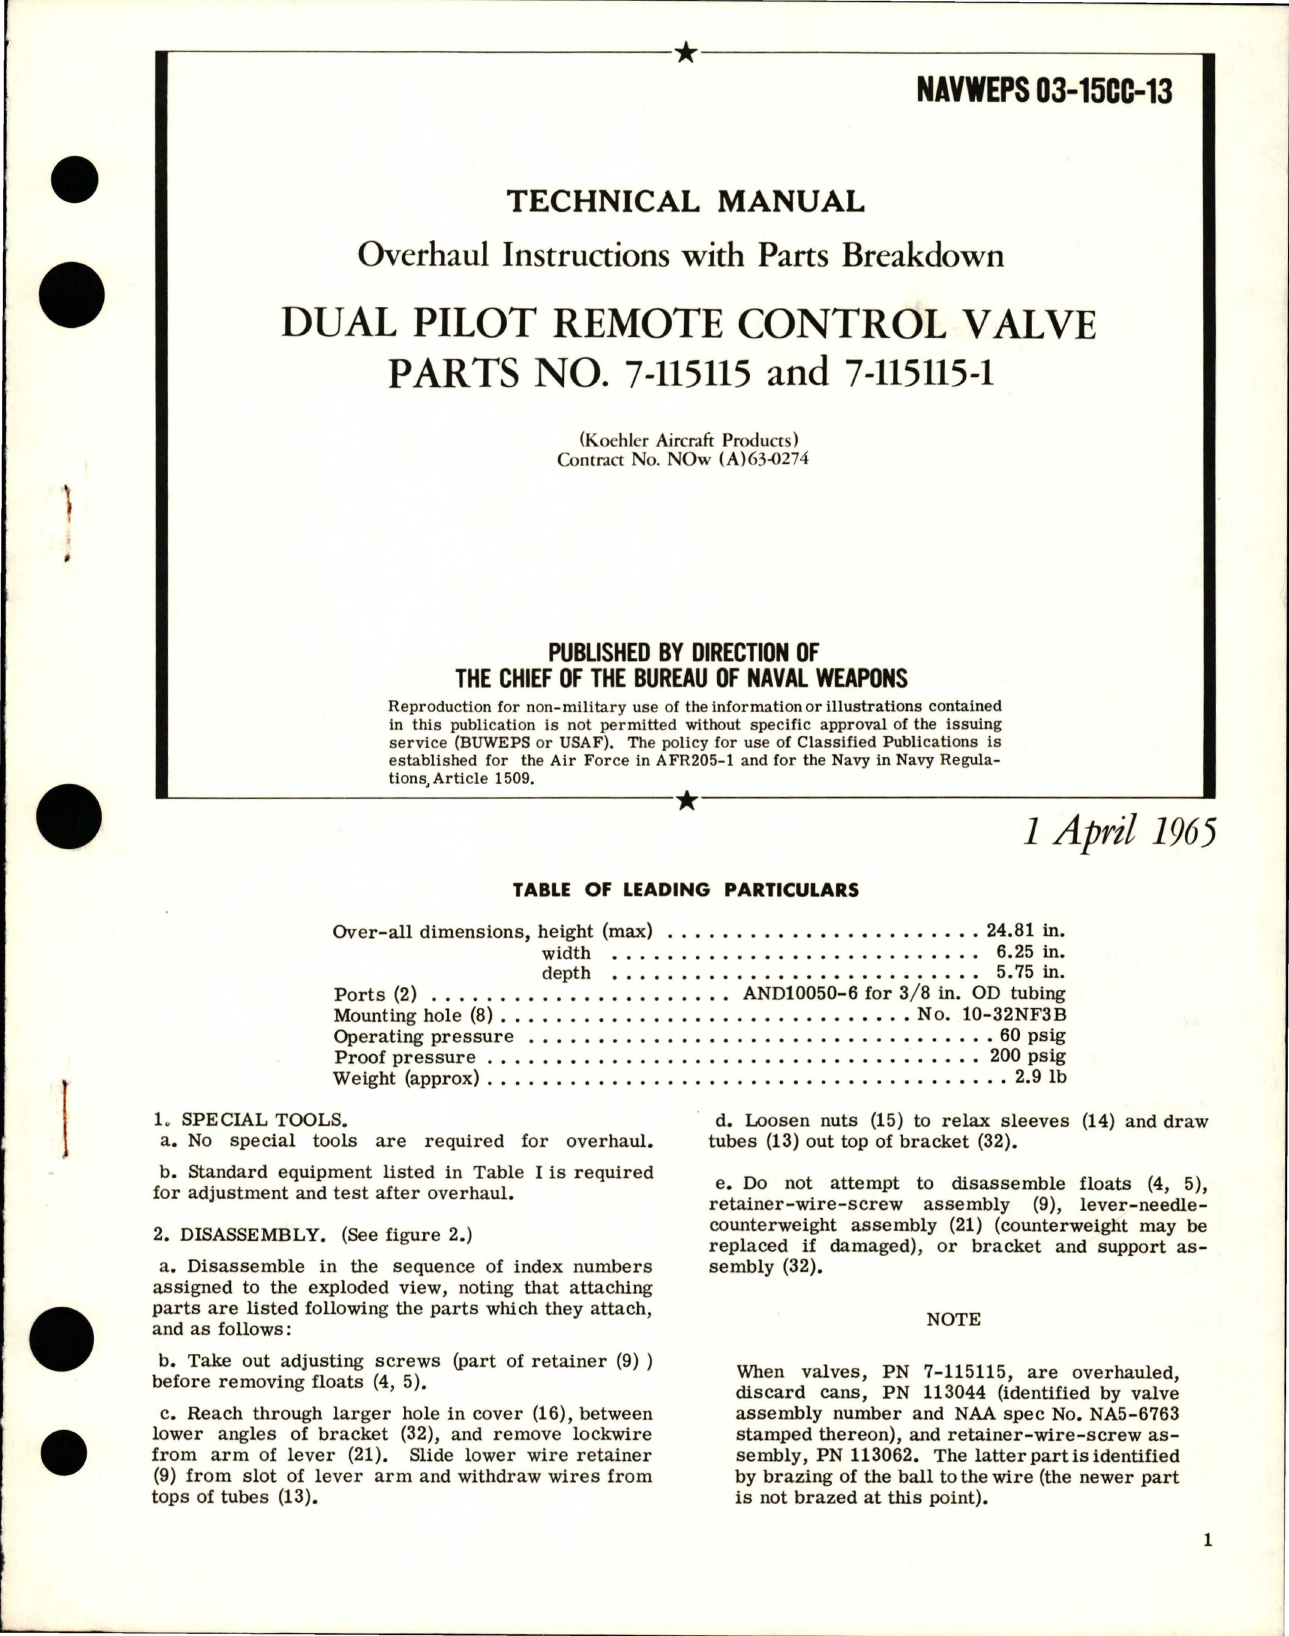 Sample page 1 from AirCorps Library document: Overhaul Instructions with Parts Breakdown for Dual Pilot Remote Control Valve - Parts 7-115115 and 7-115115-1